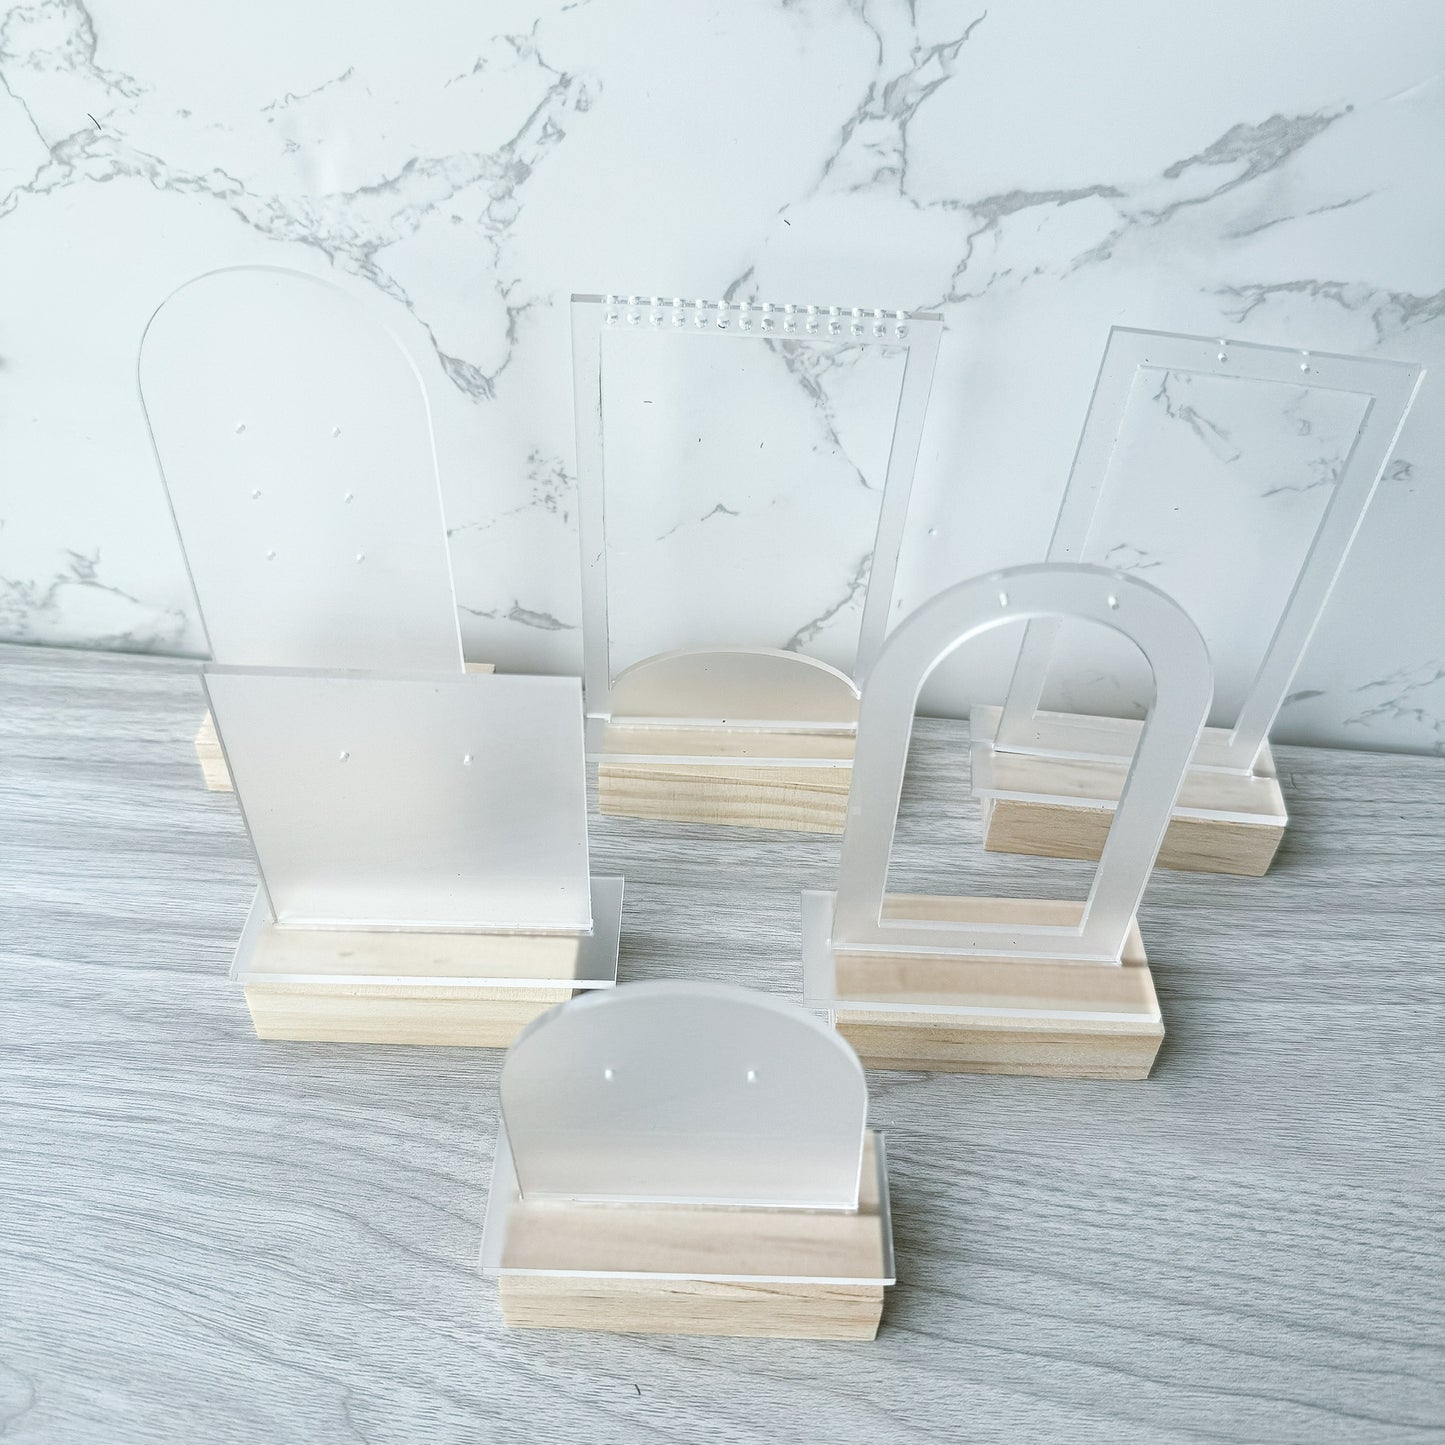 Acrylic Earring Displays - Multiple Styles Available